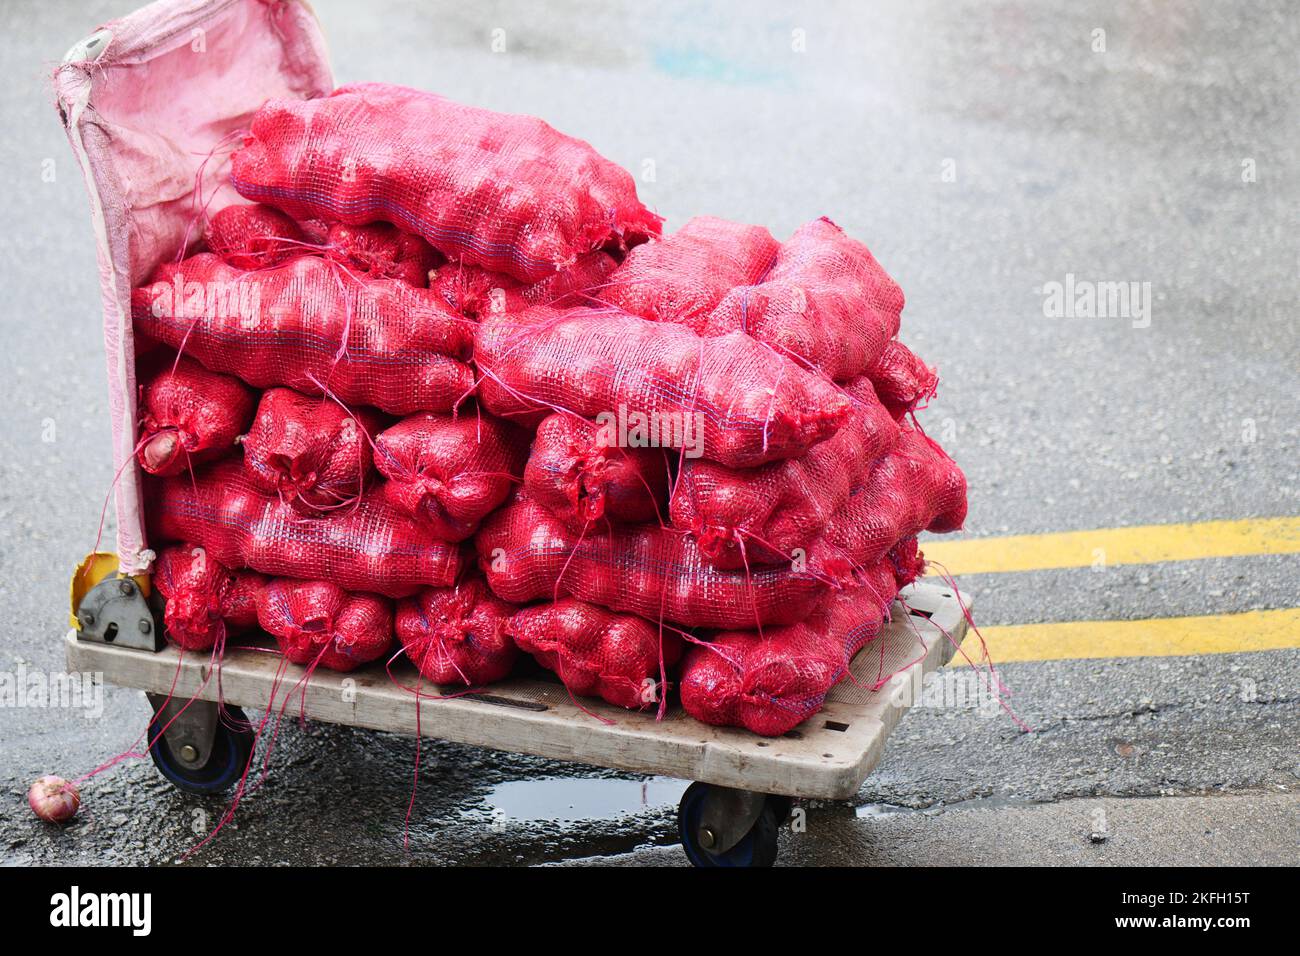 https://c8.alamy.com/comp/2KFH15T/stack-of-red-onion-in-bags-2KFH15T.jpg